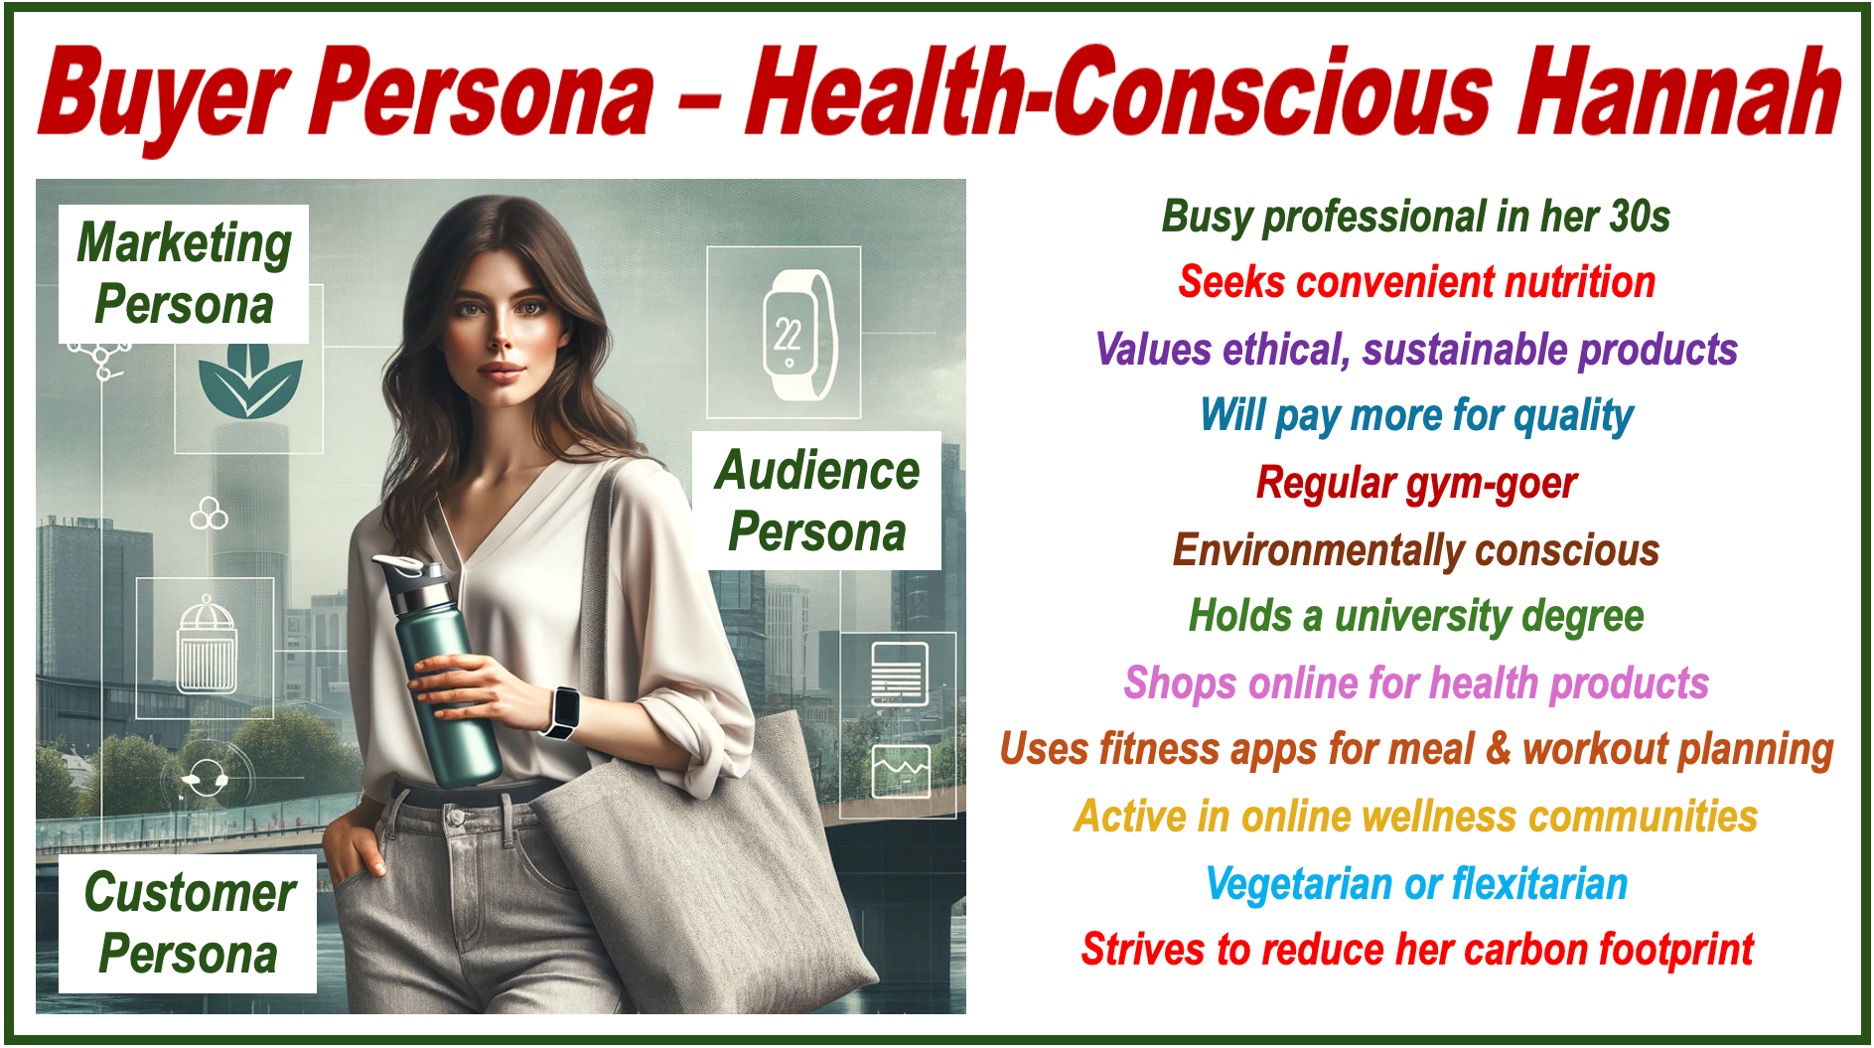 Image of a Buyer Persona and her features.